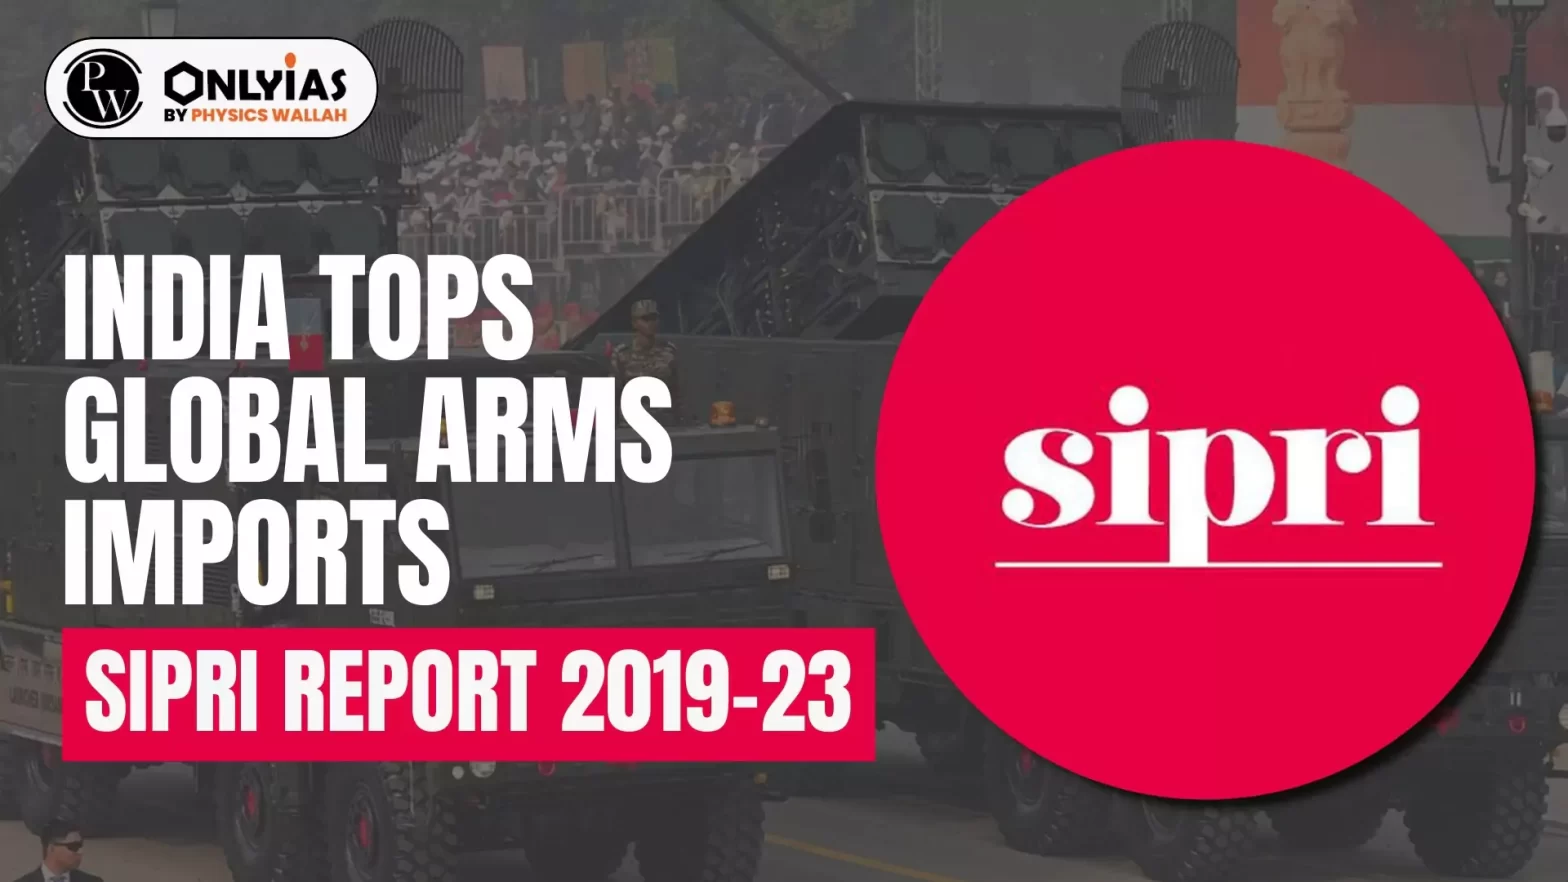 India Tops Global Arms Imports: SIPRI Report 2019-23